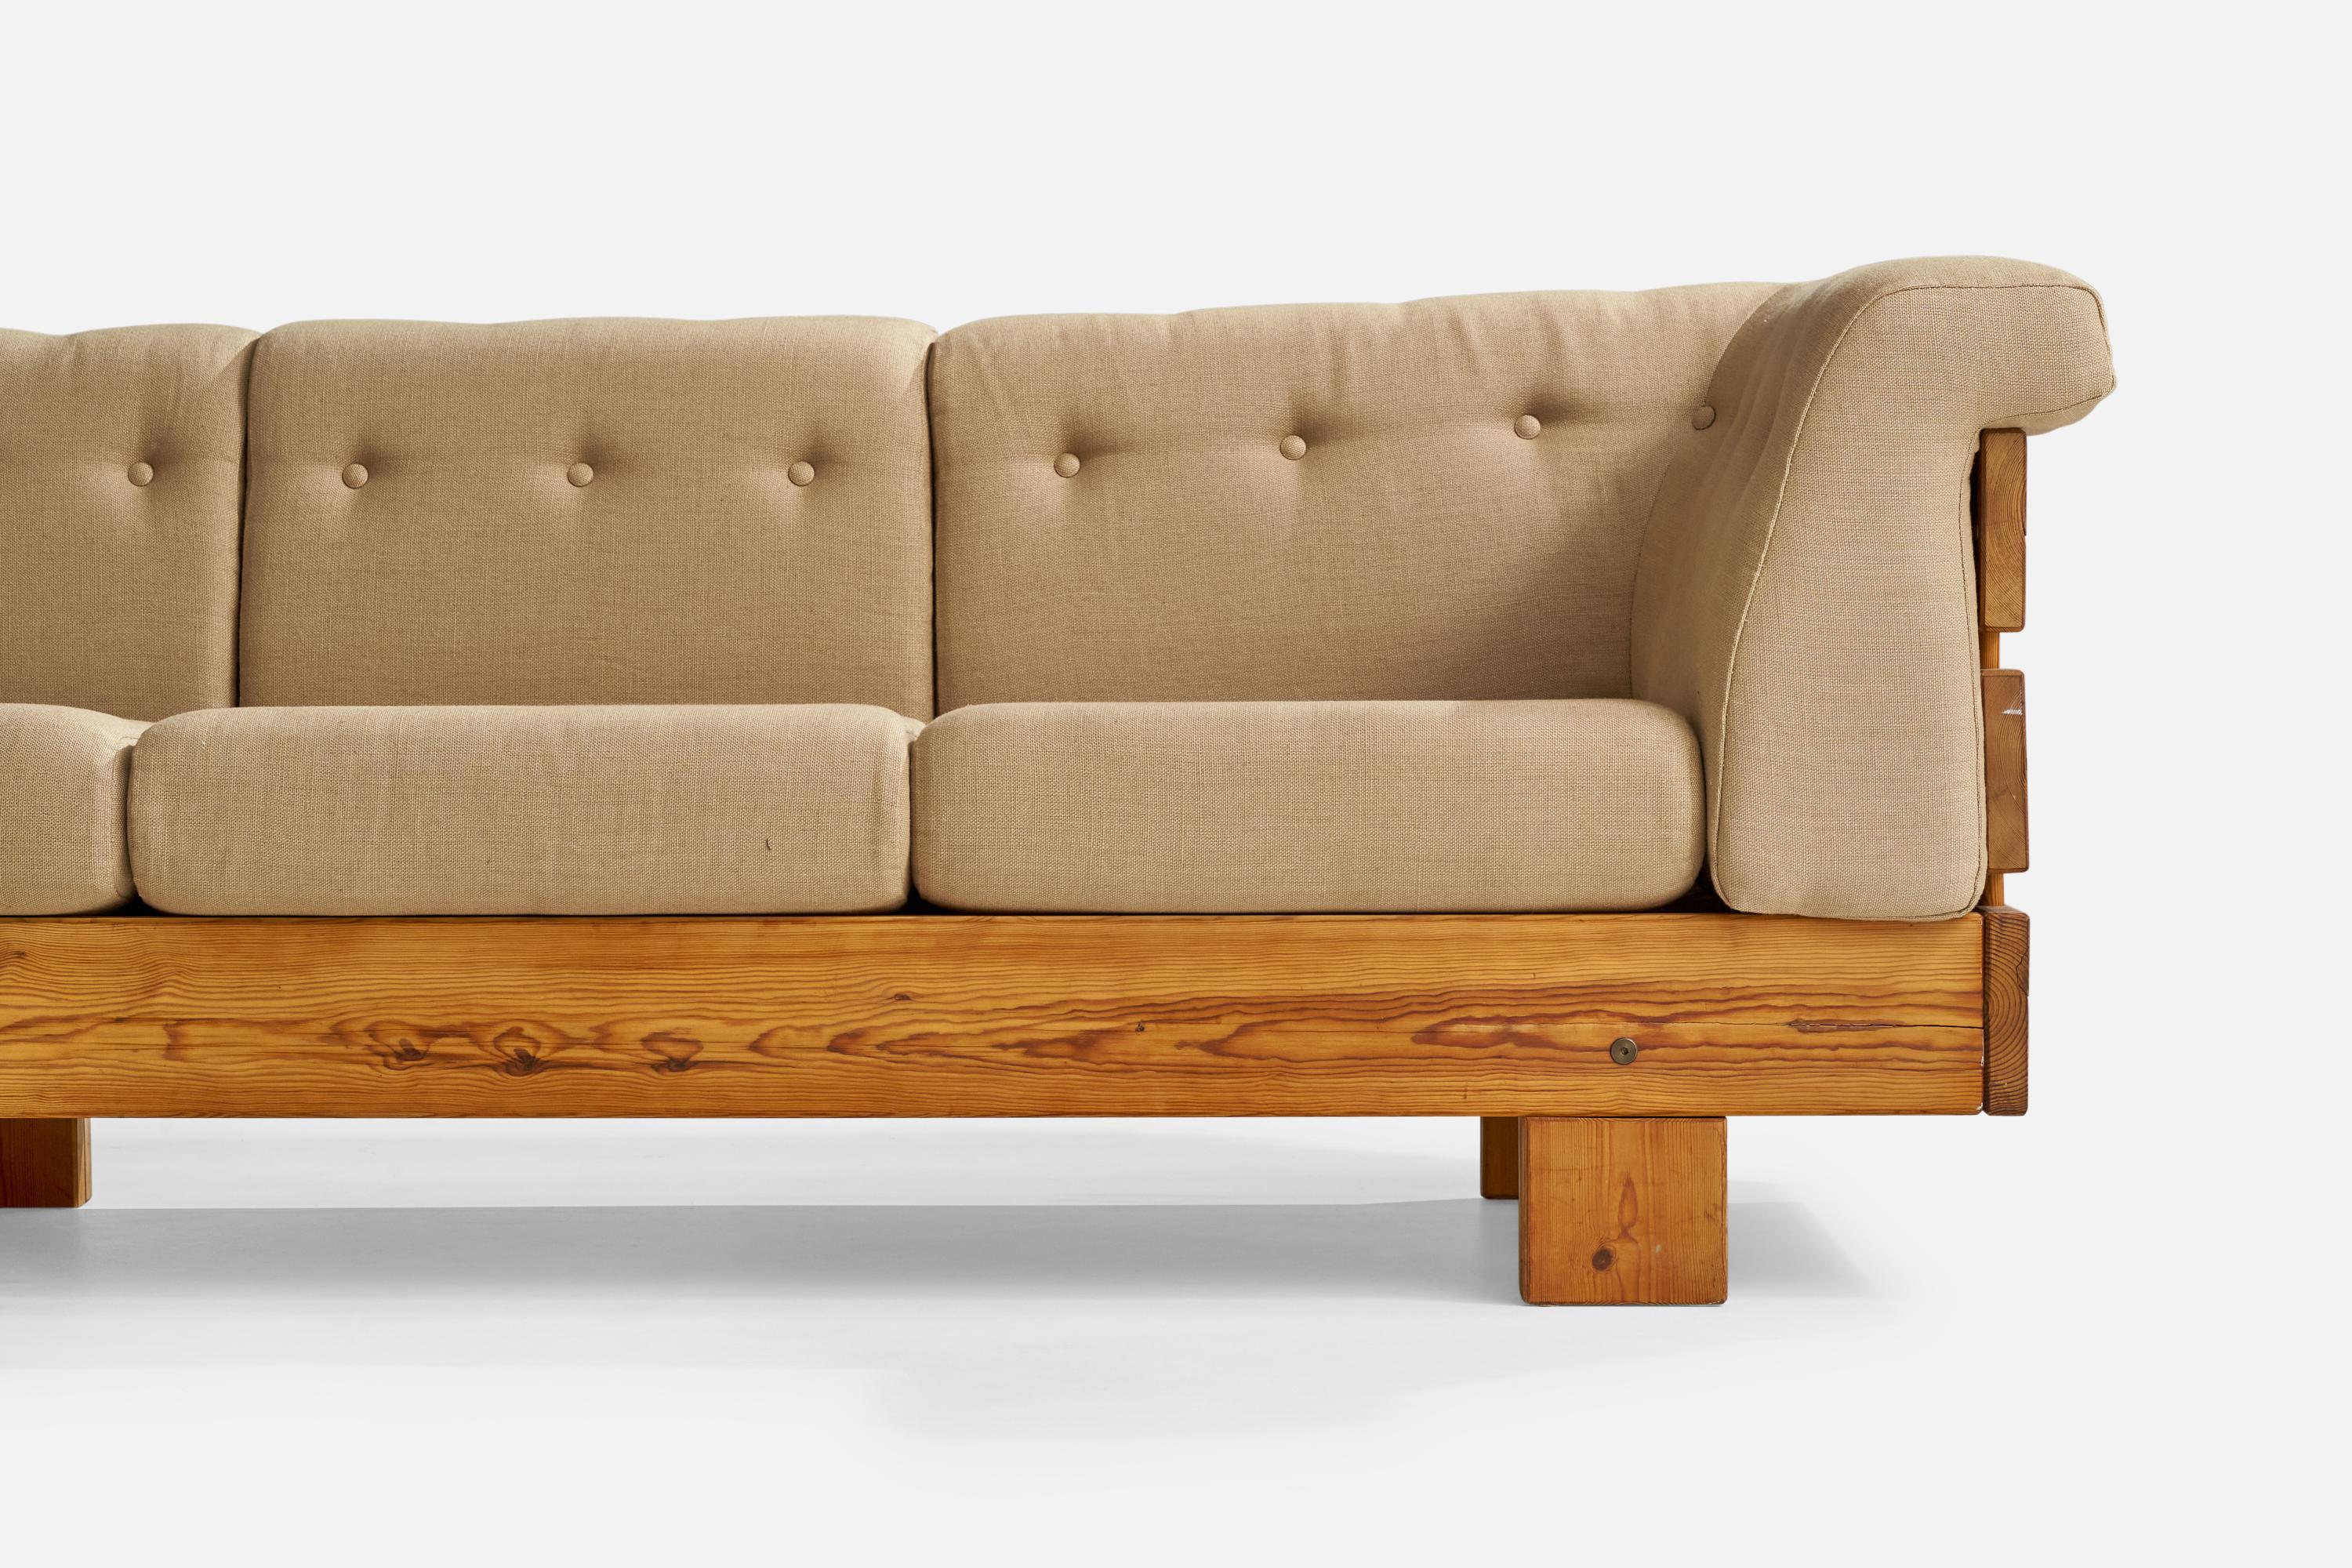 Sven Larsson, Large Sectional Sofa, Pine, Fabric, Sweden, 1970s For Sale 2